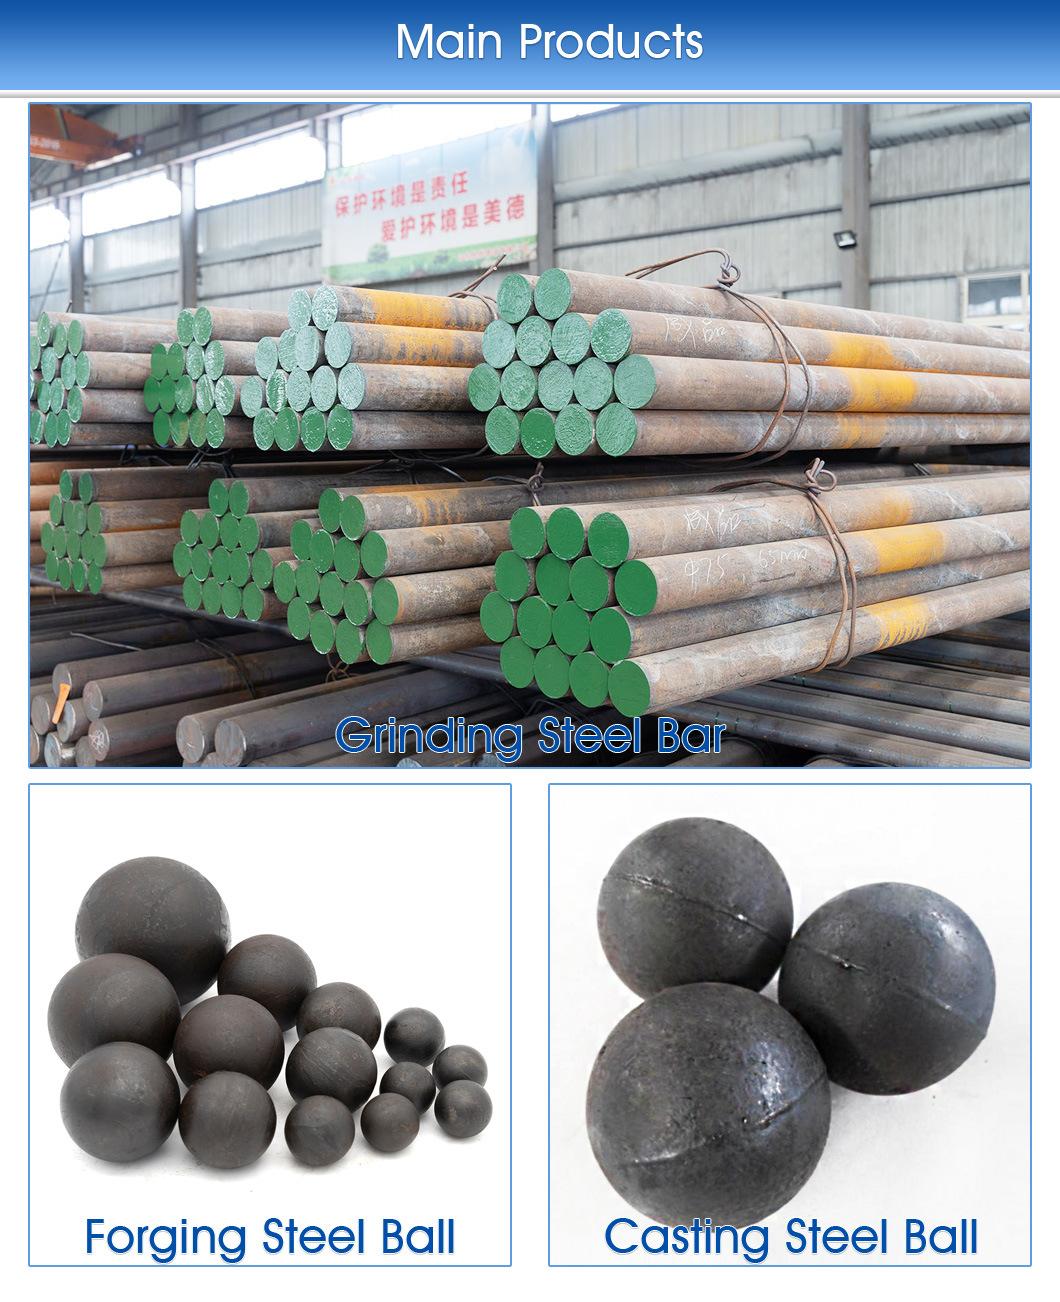 Wear-Resisting Forged Grinding Ball